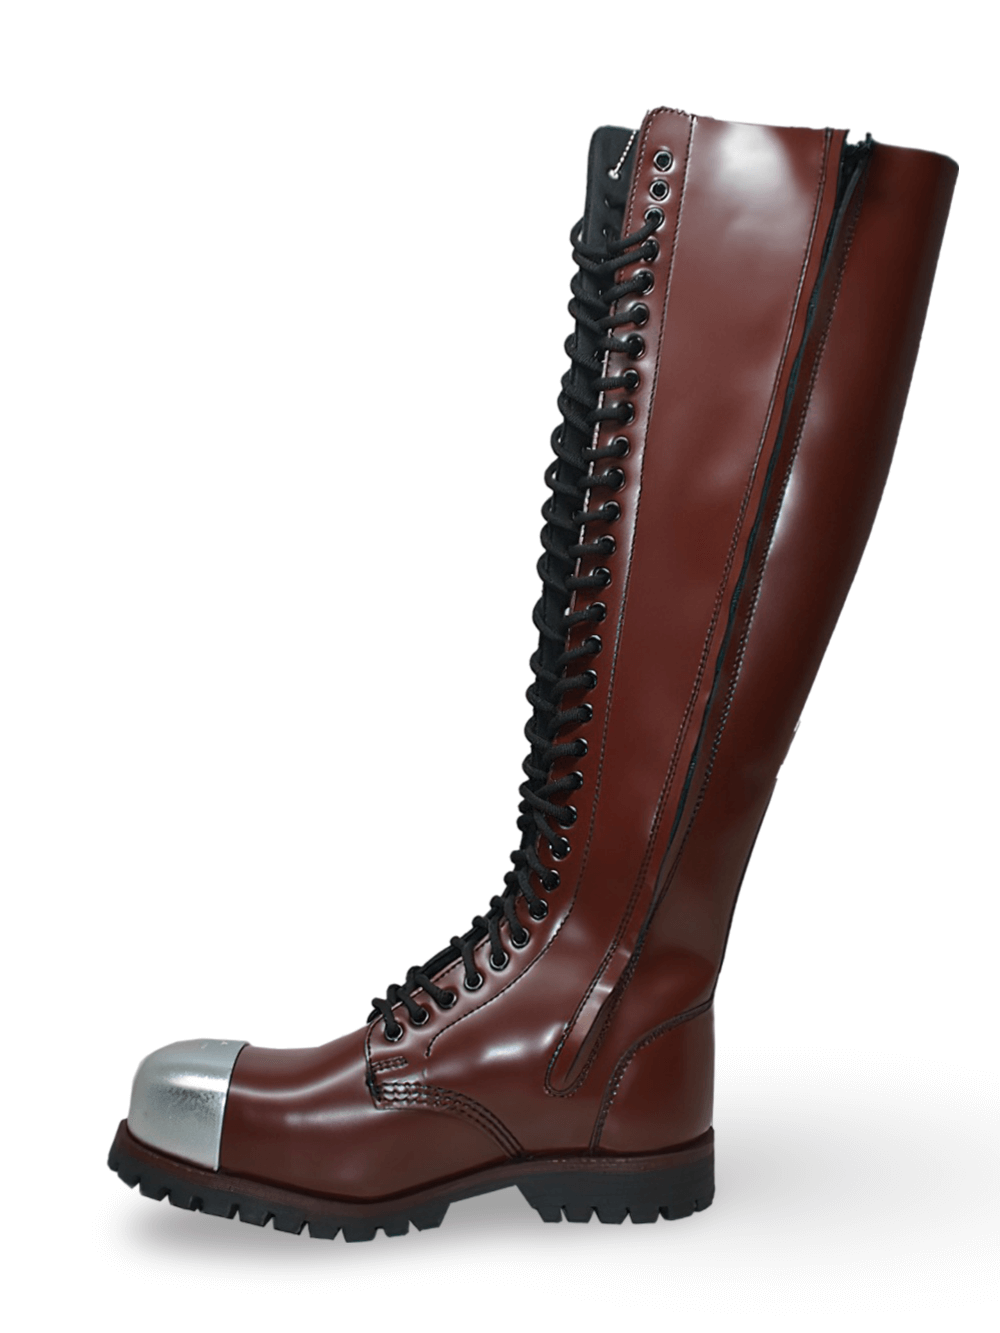 Brown-Red 30 Eyelet Steel Toe Knee High Boots with Zipper